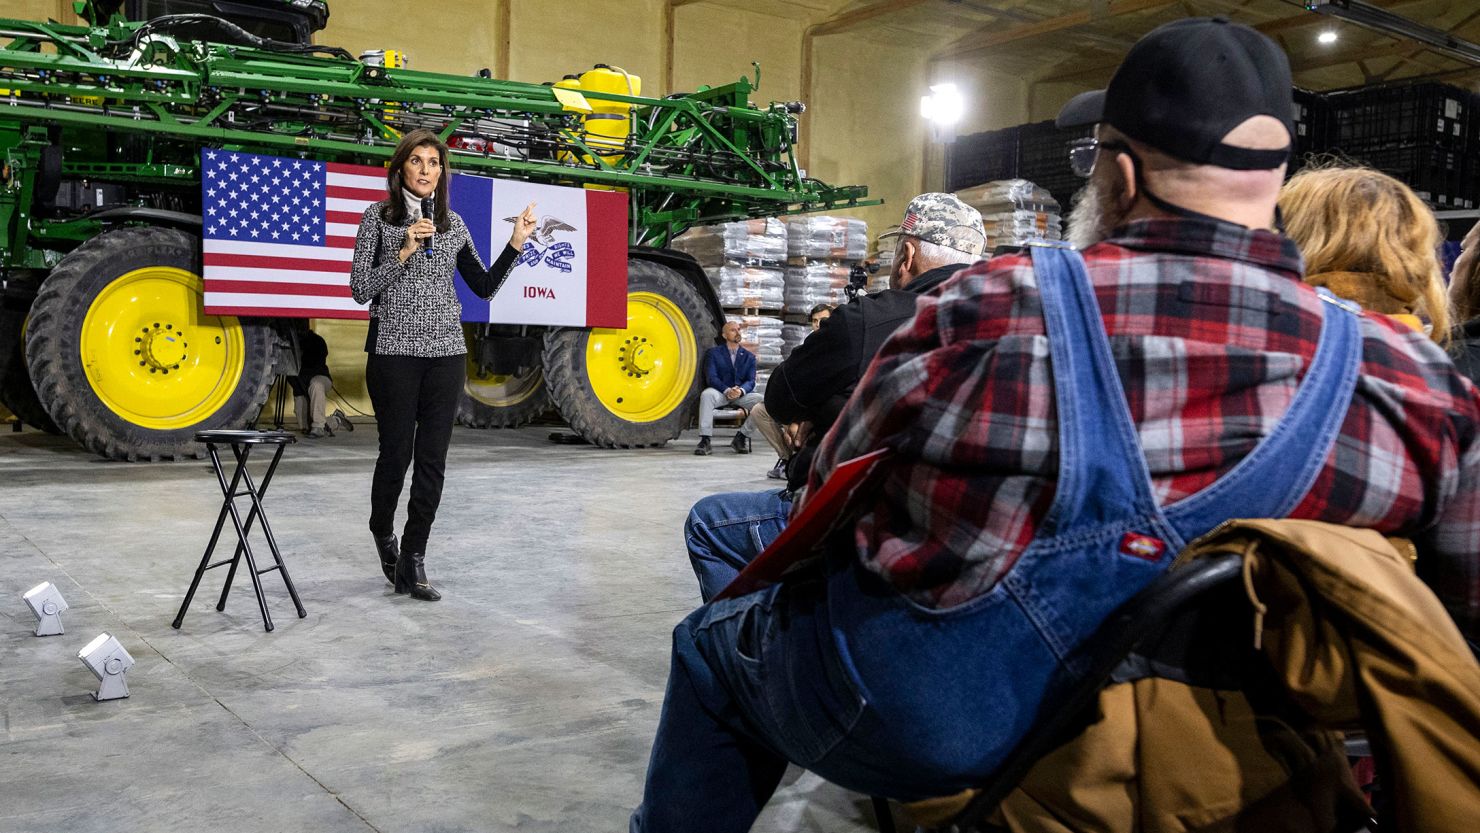 Former South Carolina Gov. Nikki Haley arrives for a town hall event in Agency, Iowa, on December 19, 2023.